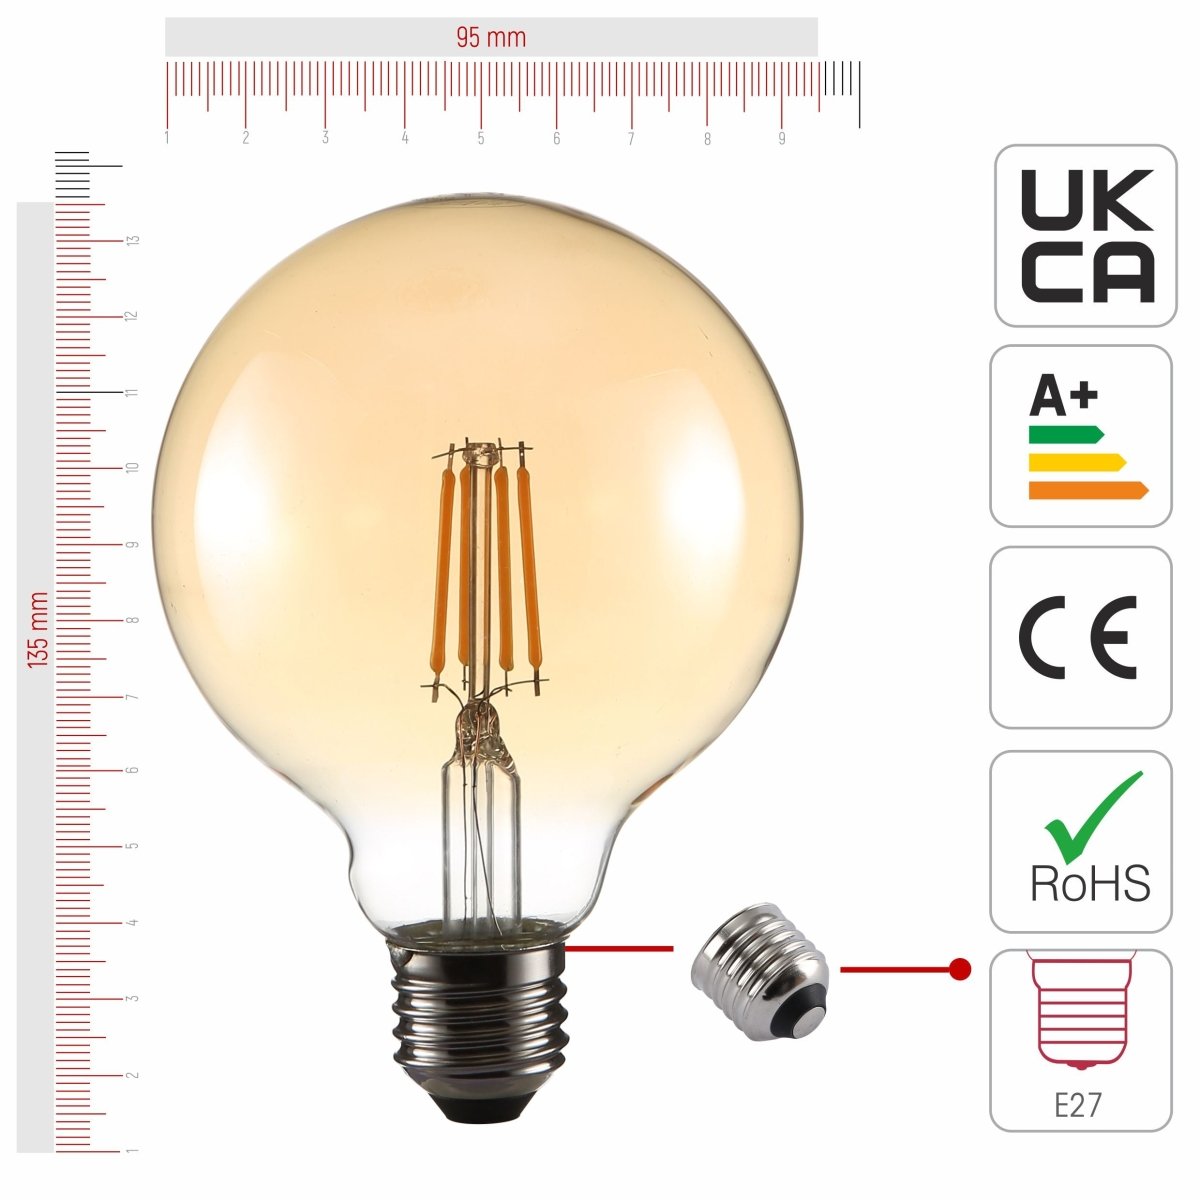 Size and certifications of LED Filament Bulb G95 Globe E27 Edison Screw 6.5W 680lm Warm White 2400K Amber